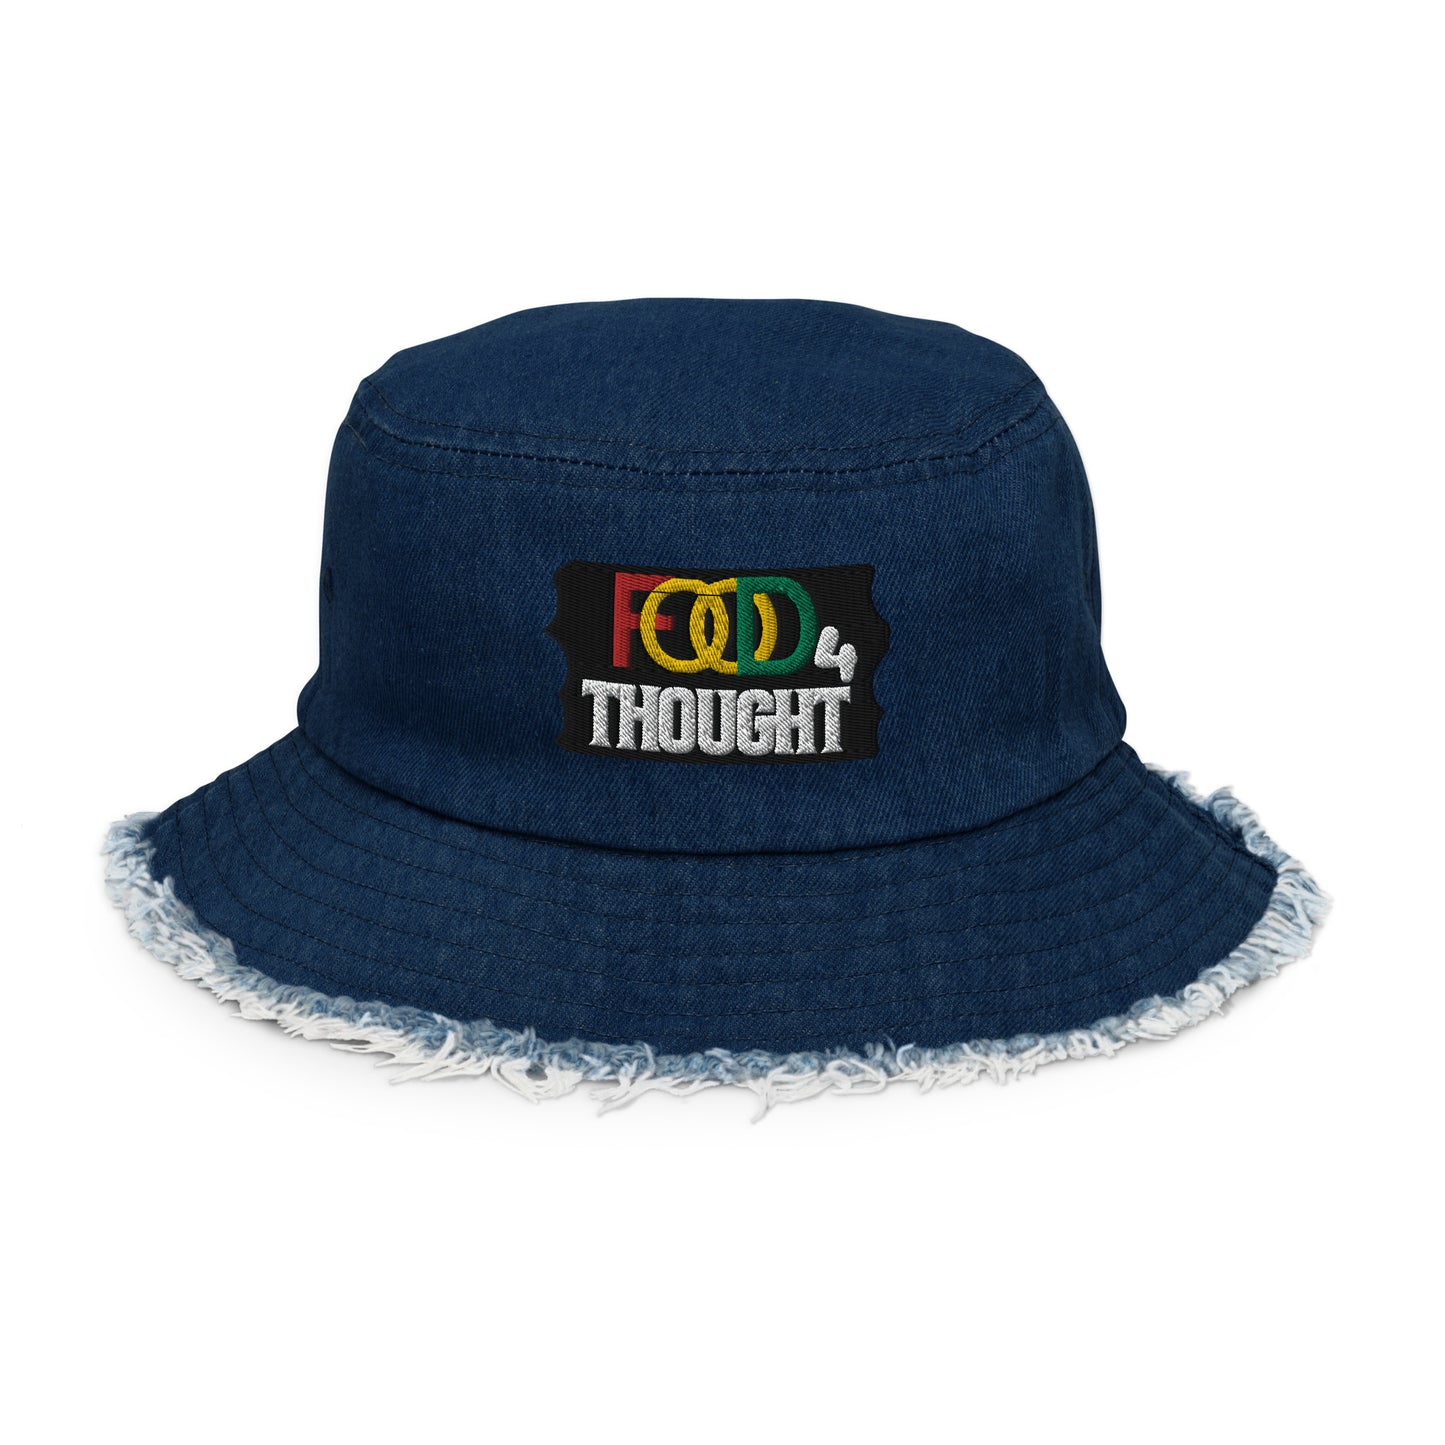 Food For Thought Embroidery Distressed Denim Bucket Hat